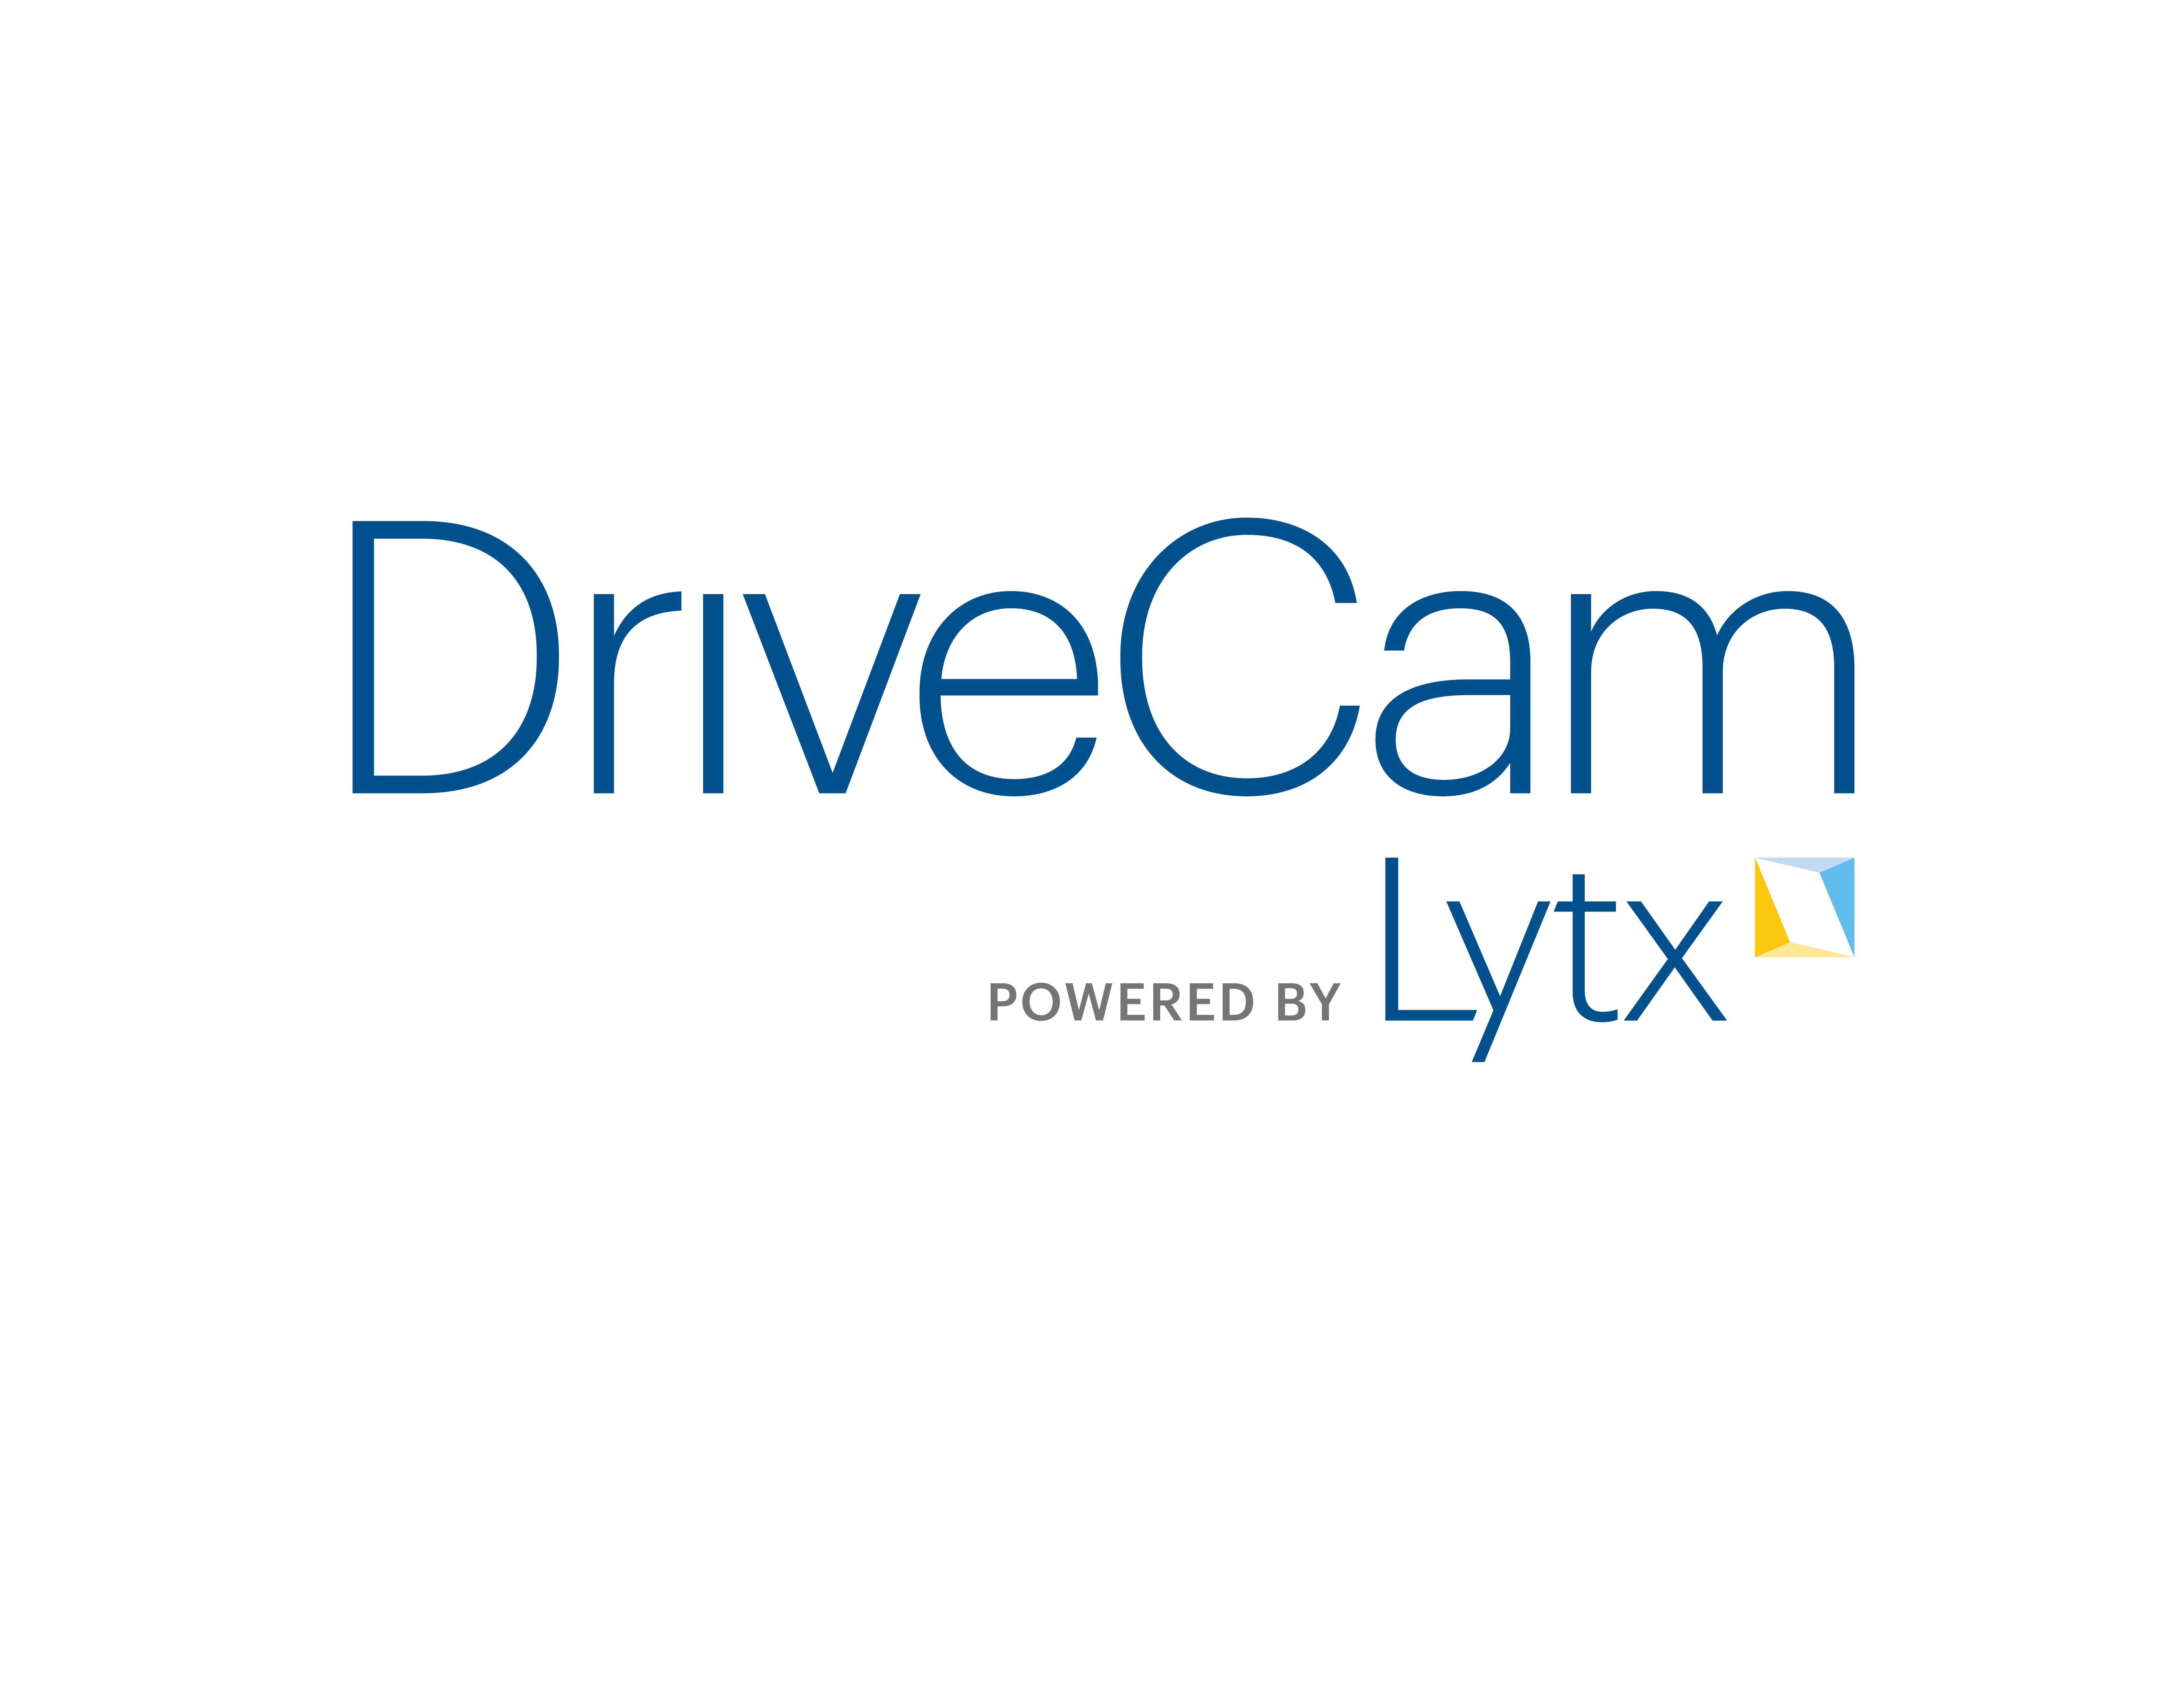  DRIVECAM POWERED BY LYTX